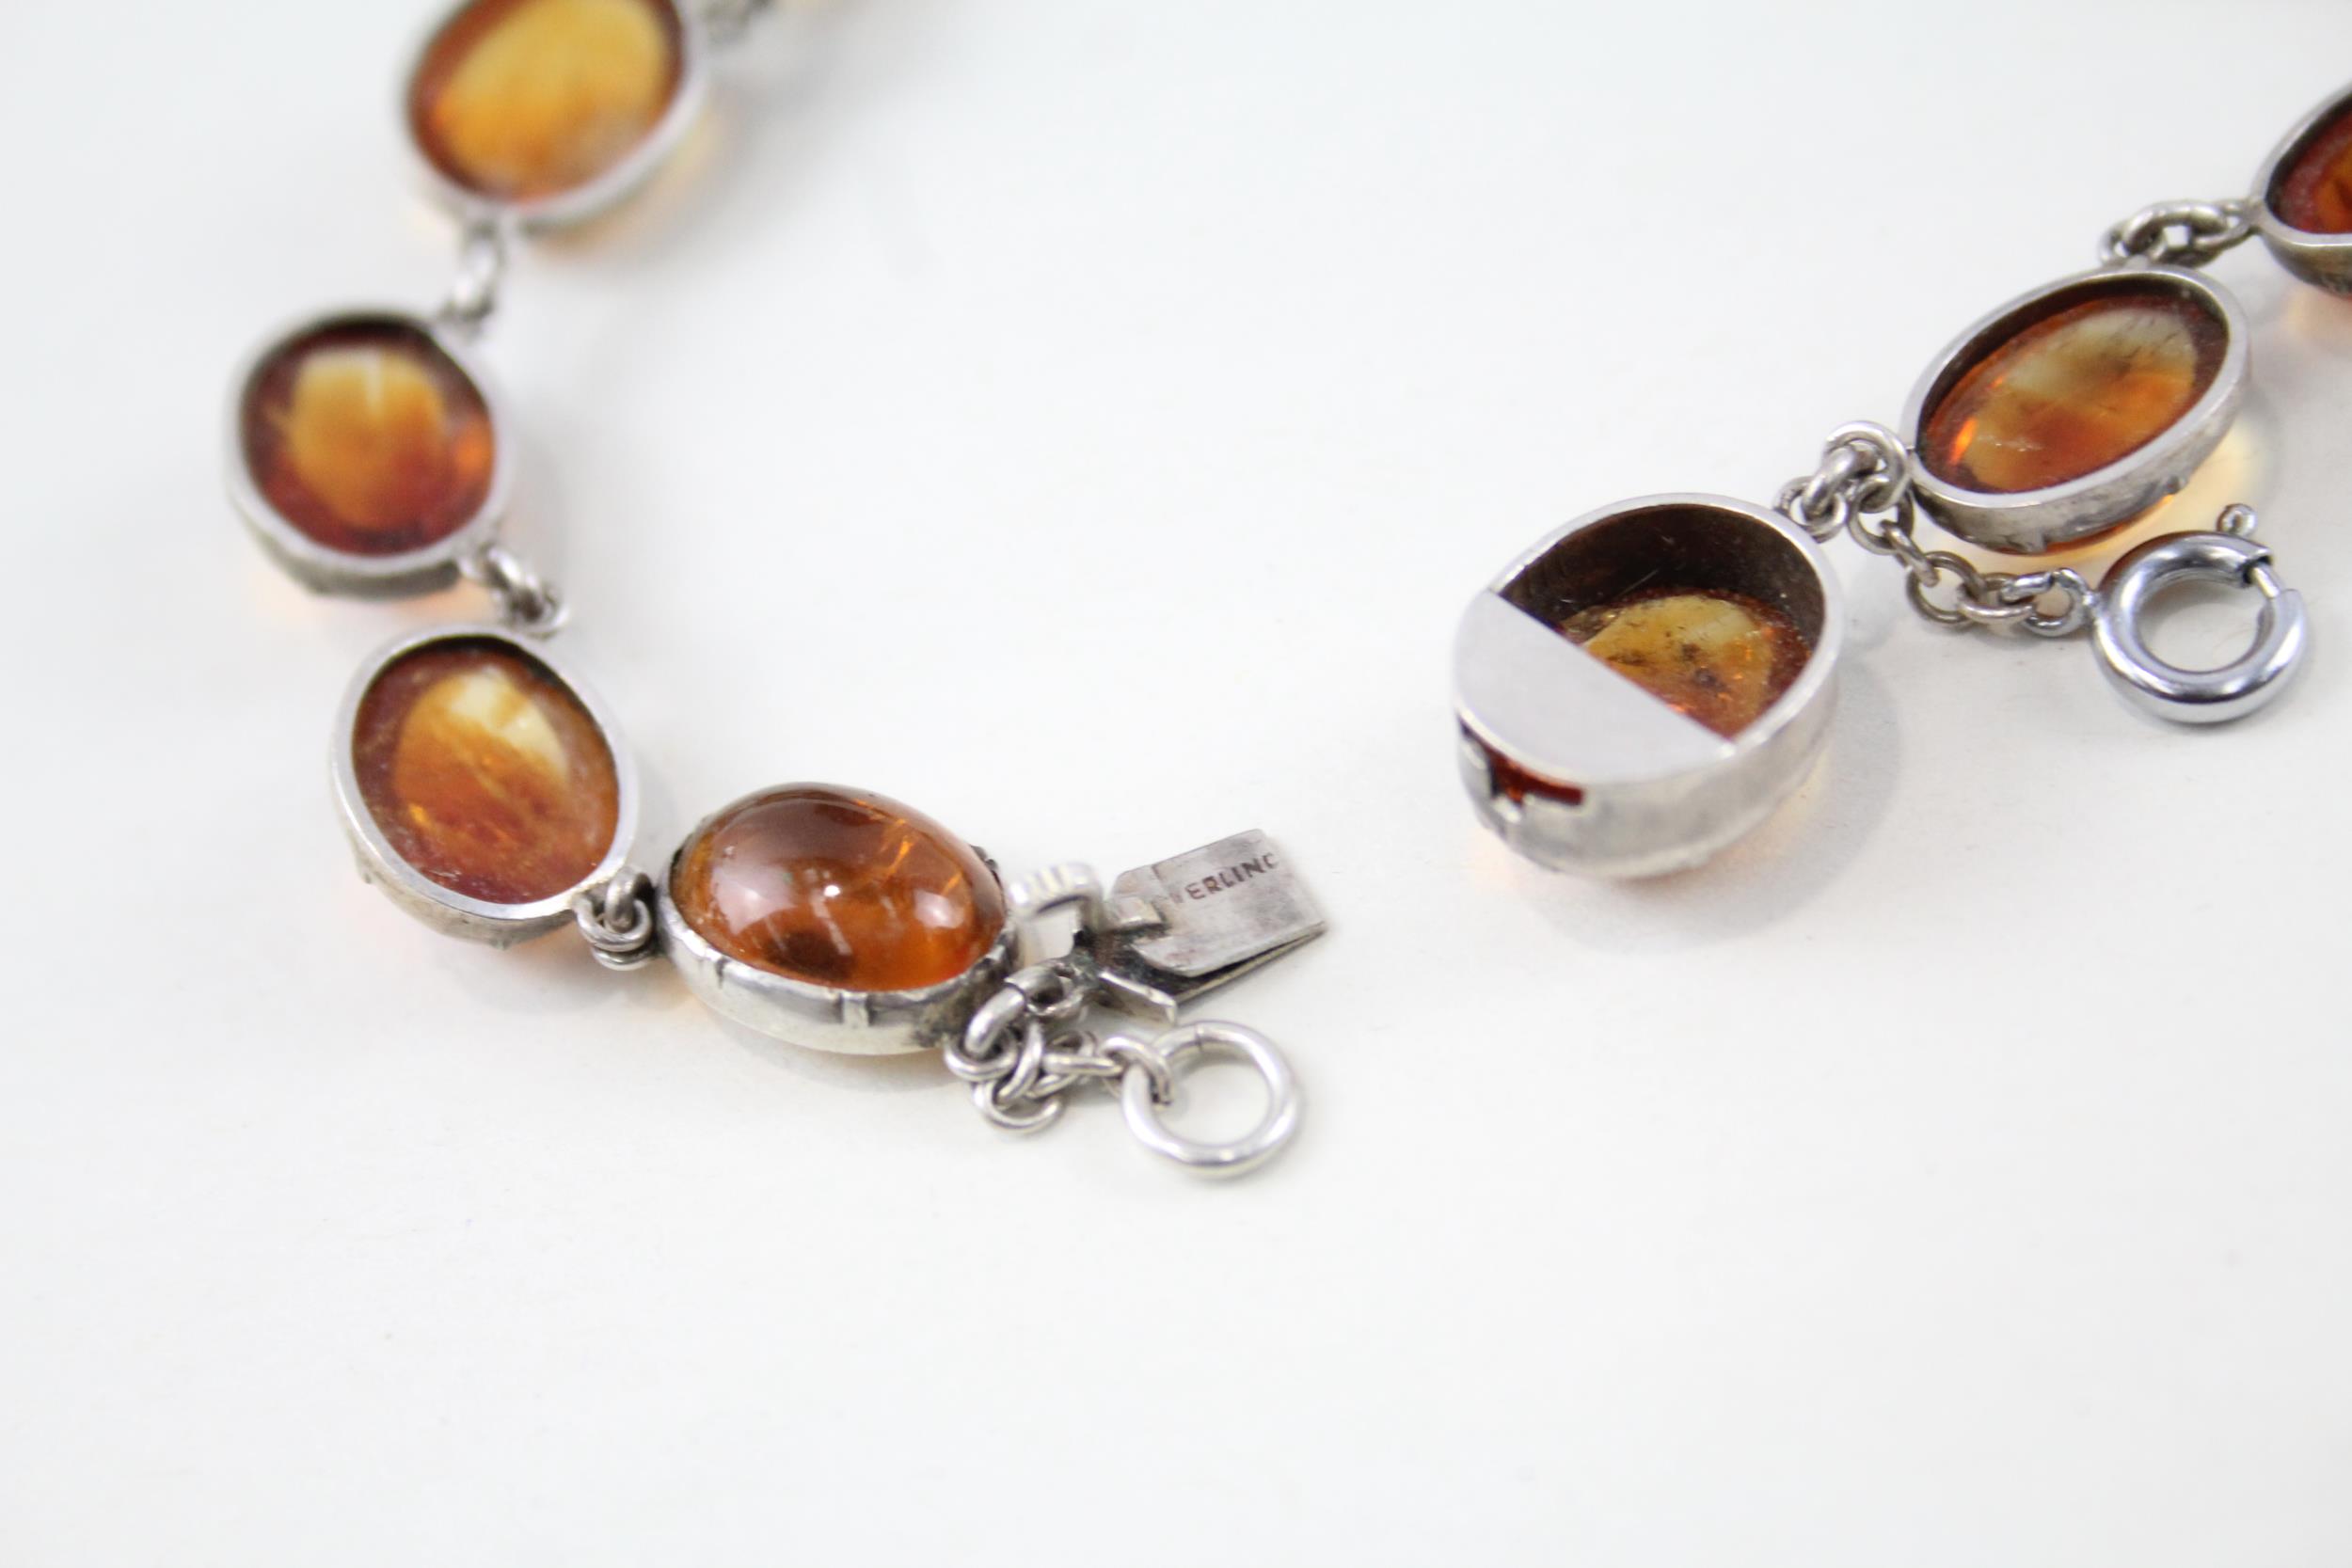 Silver Citrine panel necklace (35g) - Image 4 of 4